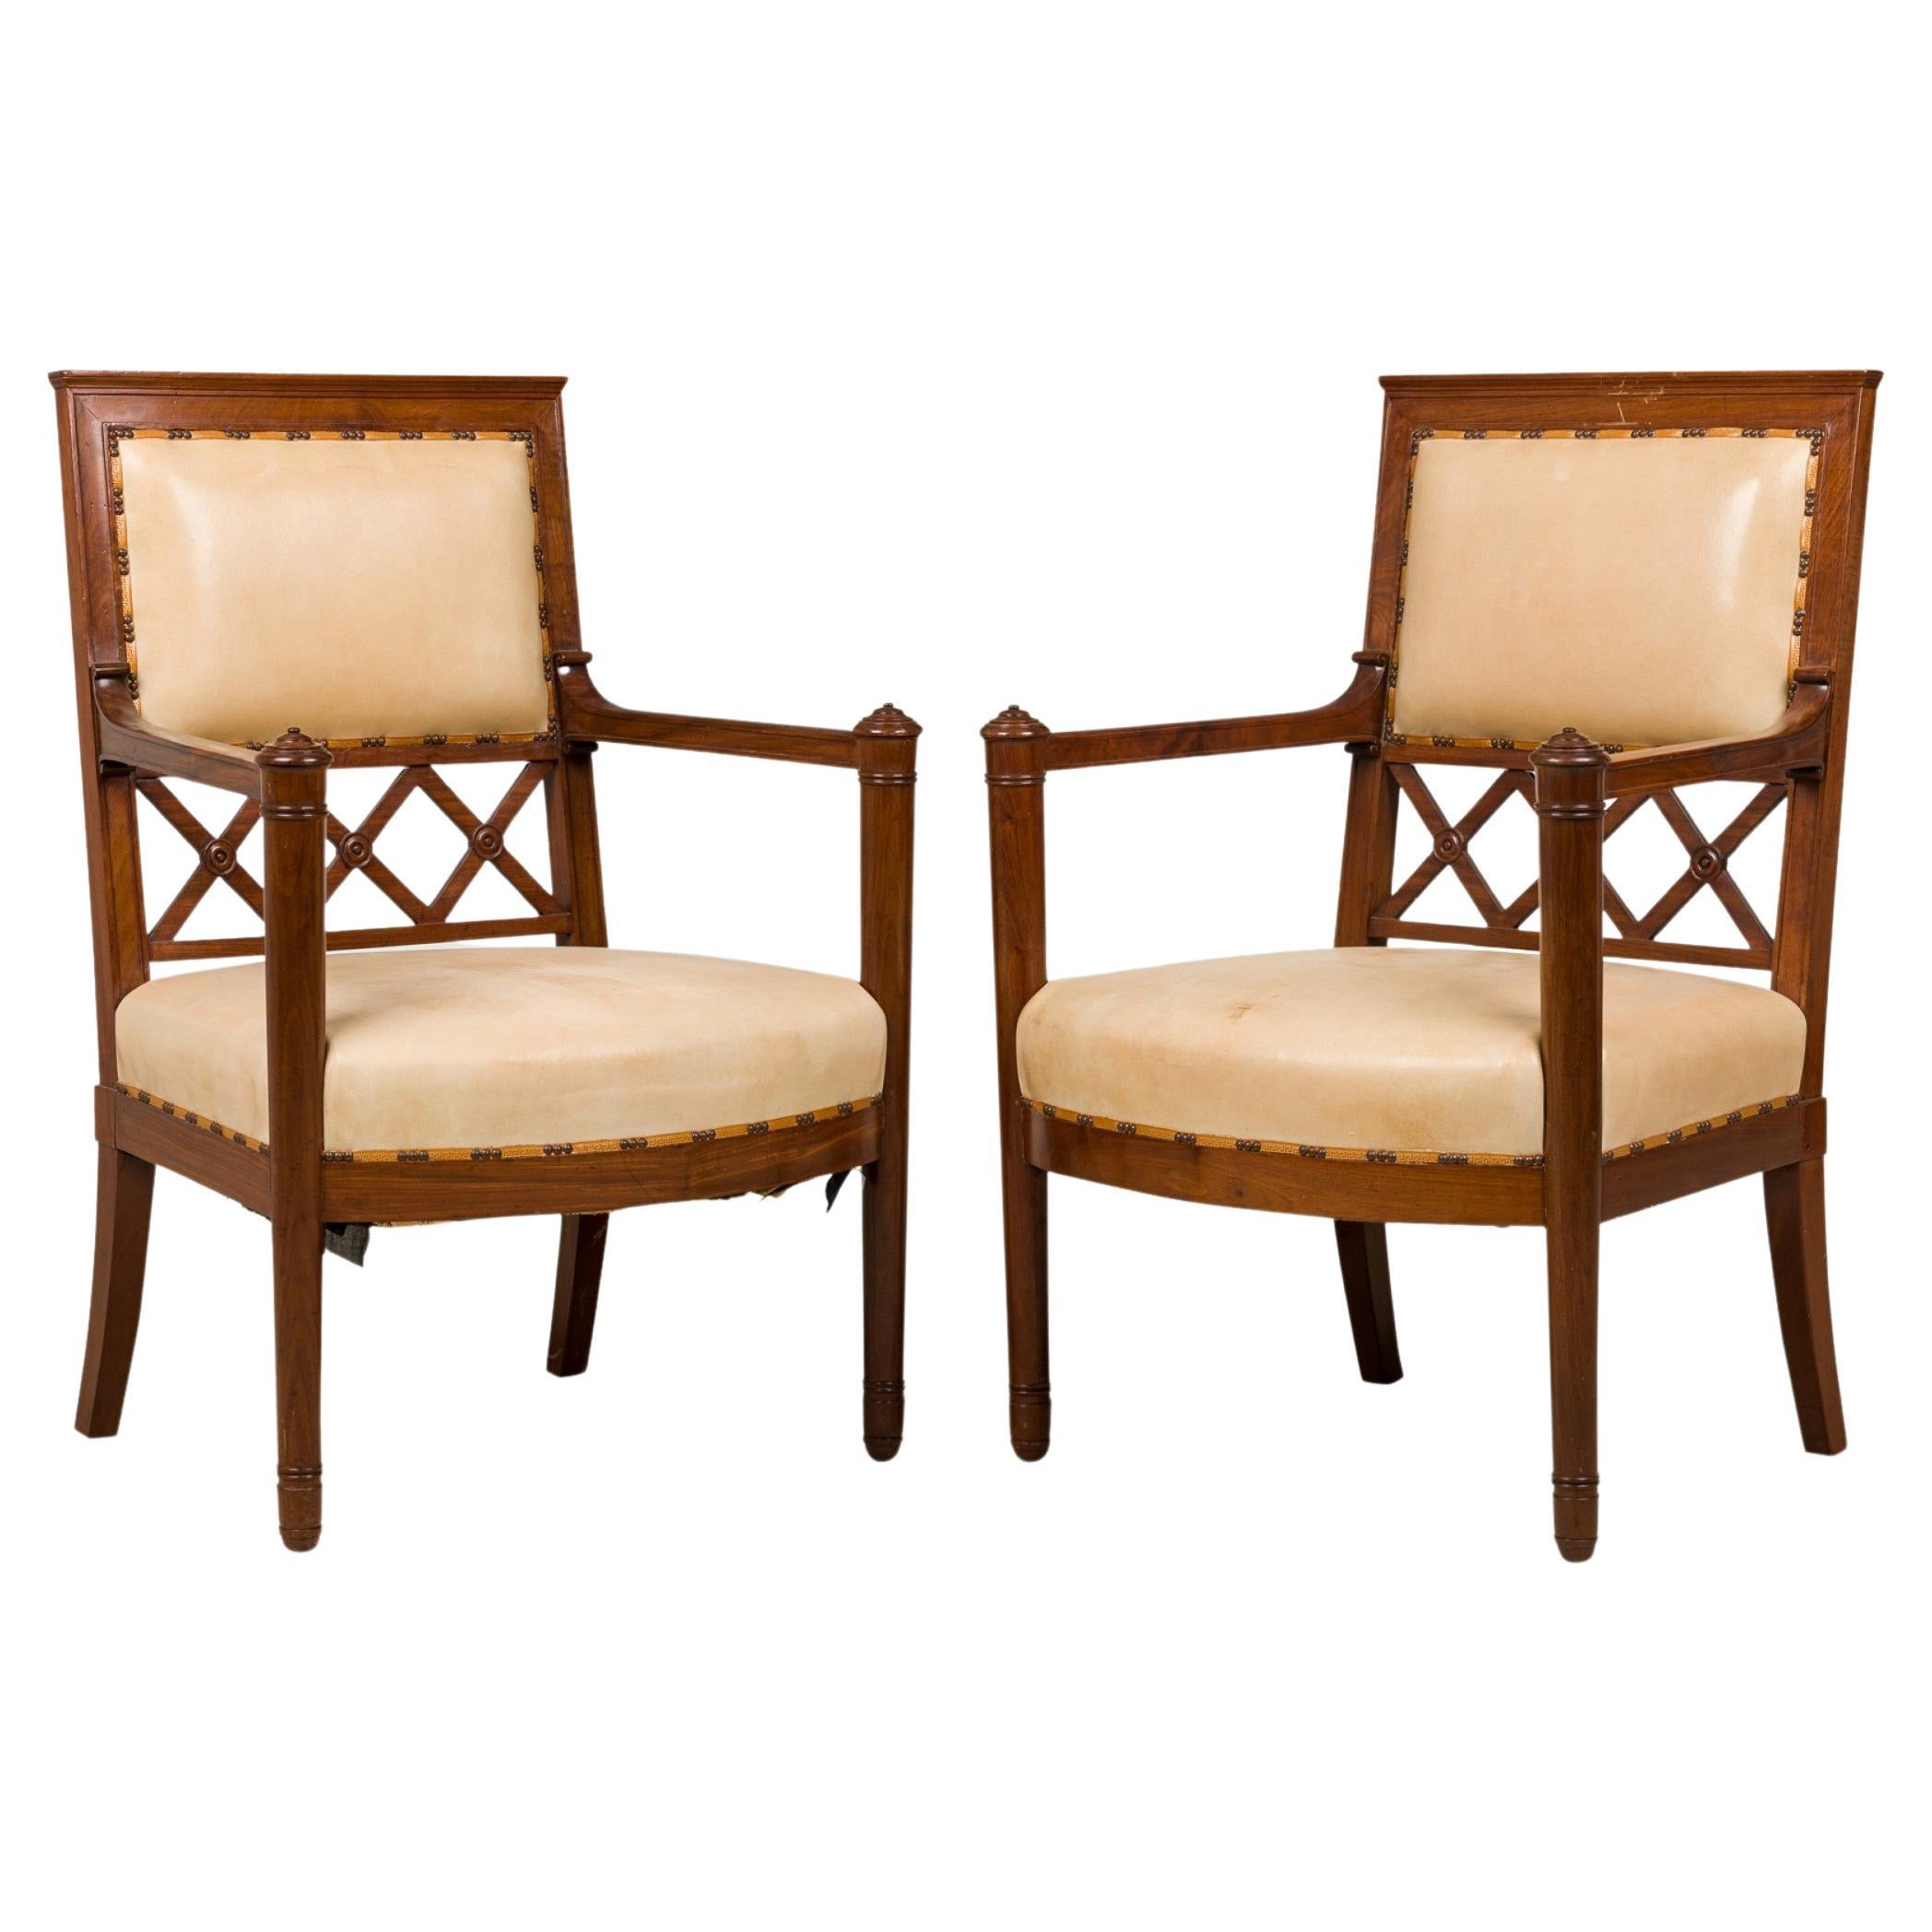 Pair of French Consulate Arm Chairs